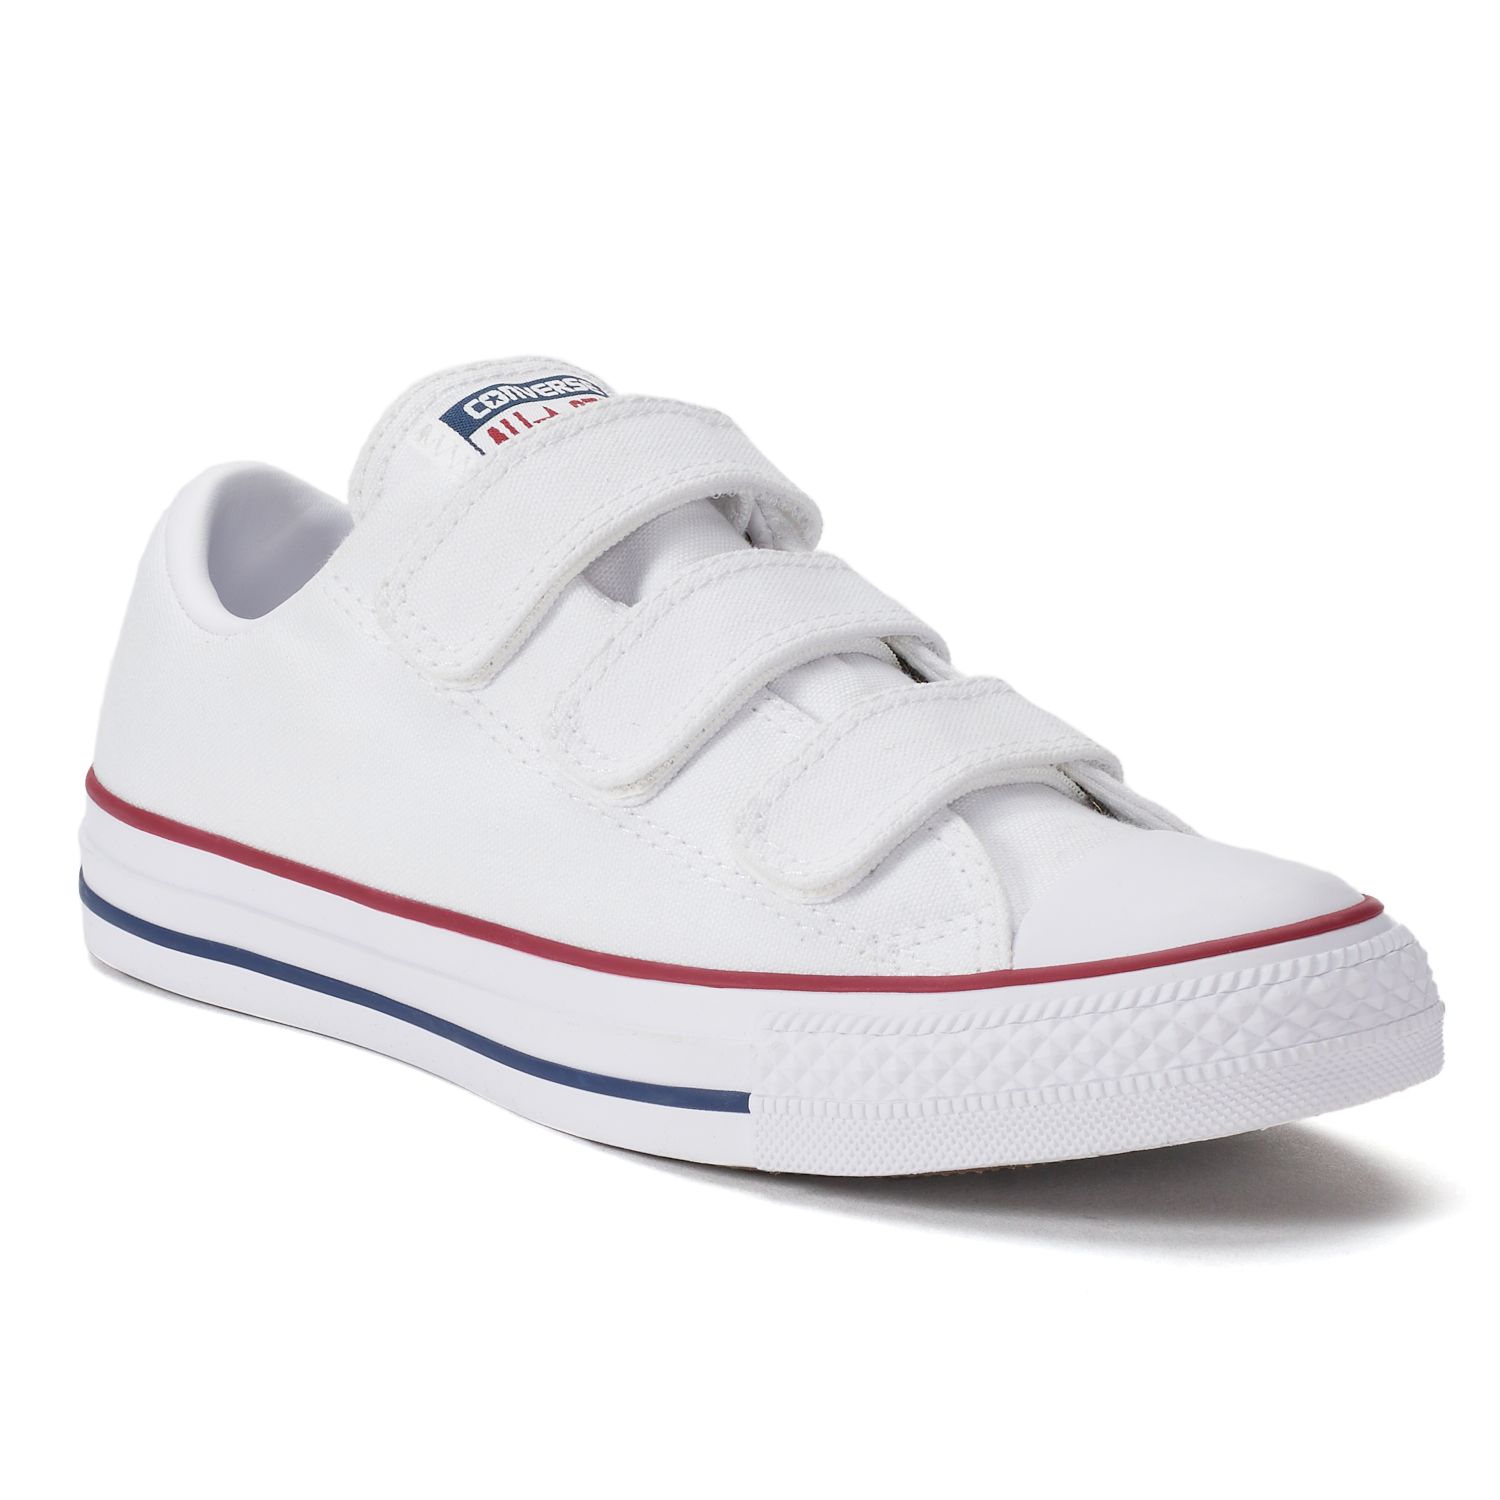 women's converse chuck taylor all star 3v sneakers